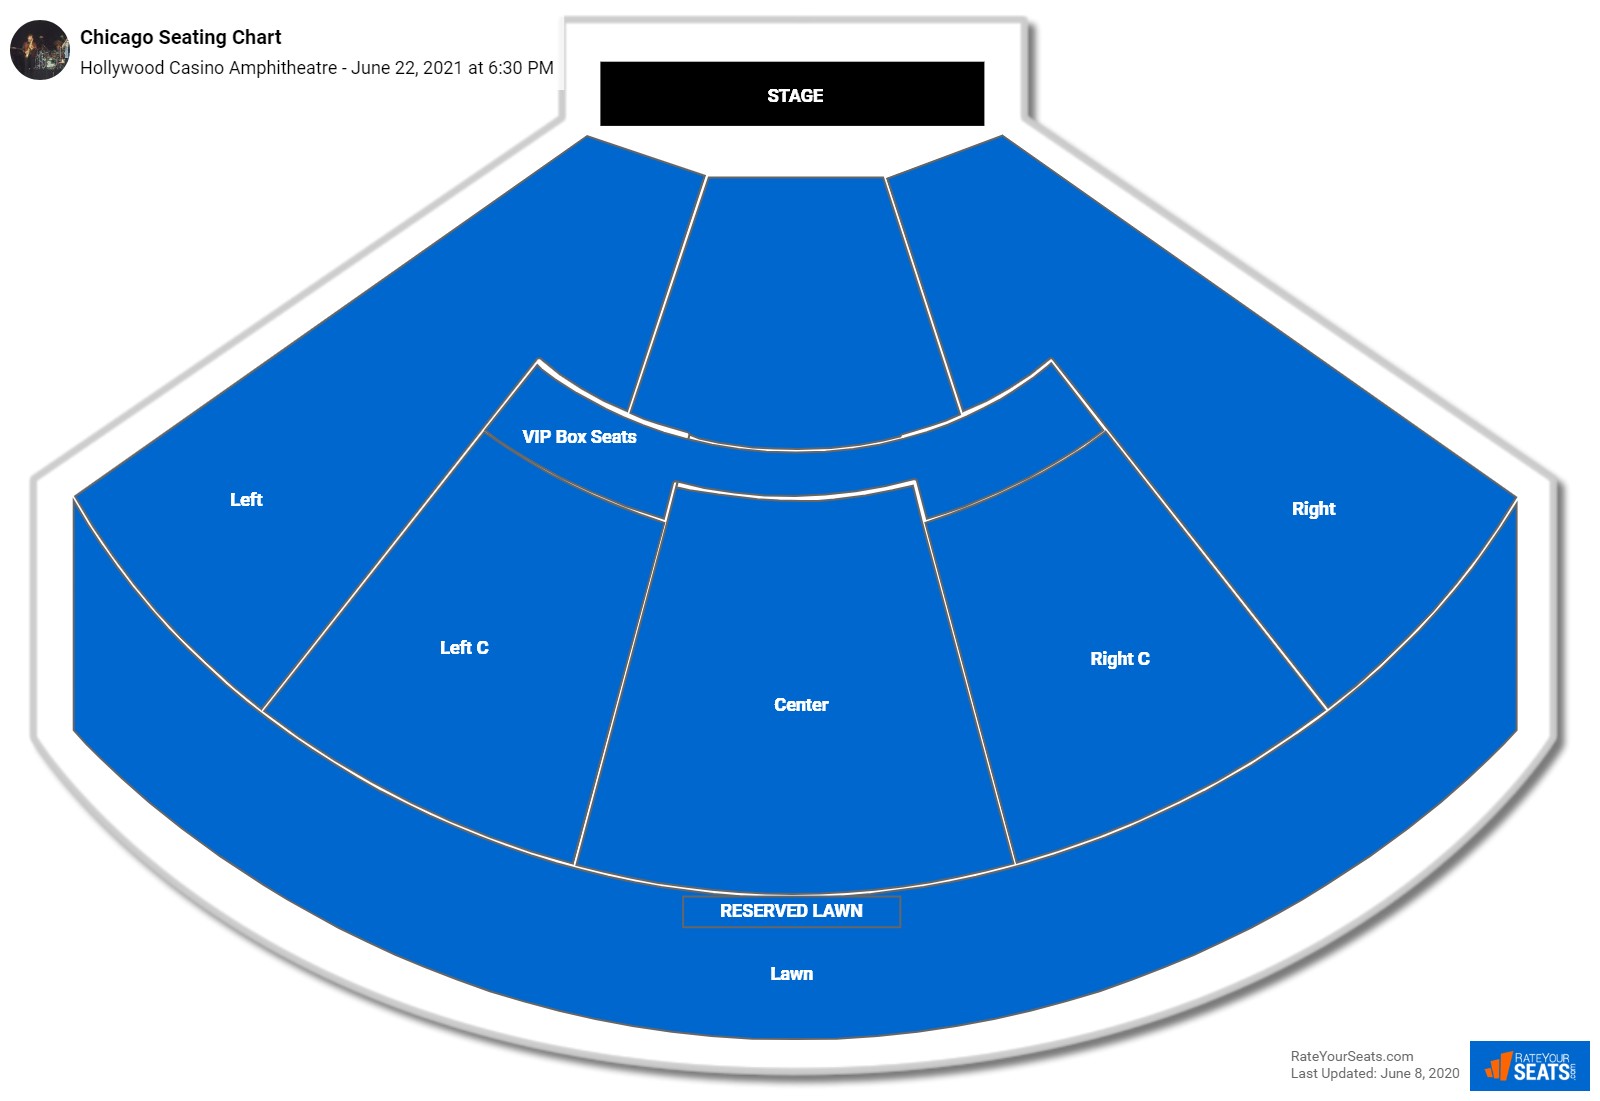 Hollywood Casino Amphitheatre St. Louis Seating Chart